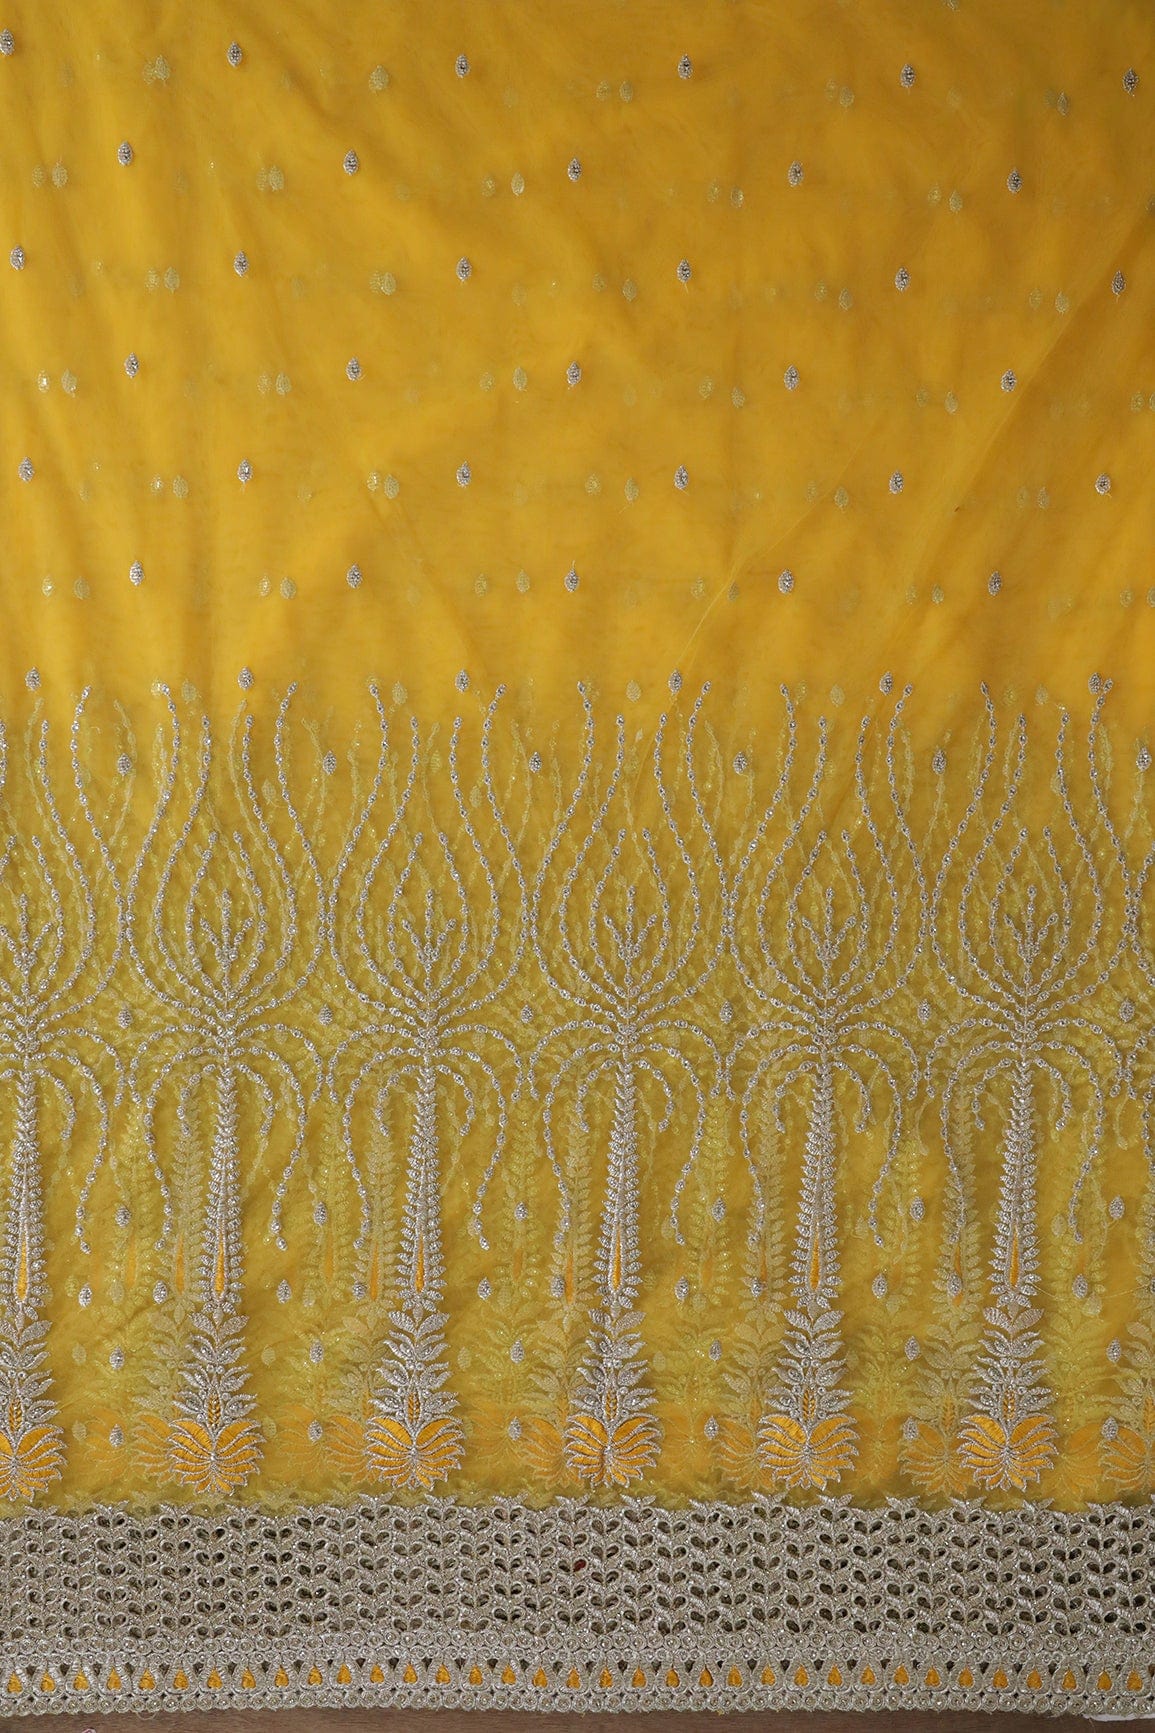 doeraa Embroidery Fabrics Big Width''56'' Yellow Thread With Zari Traditional Embroidery Work On Yellow Soft Net Fabric With Border